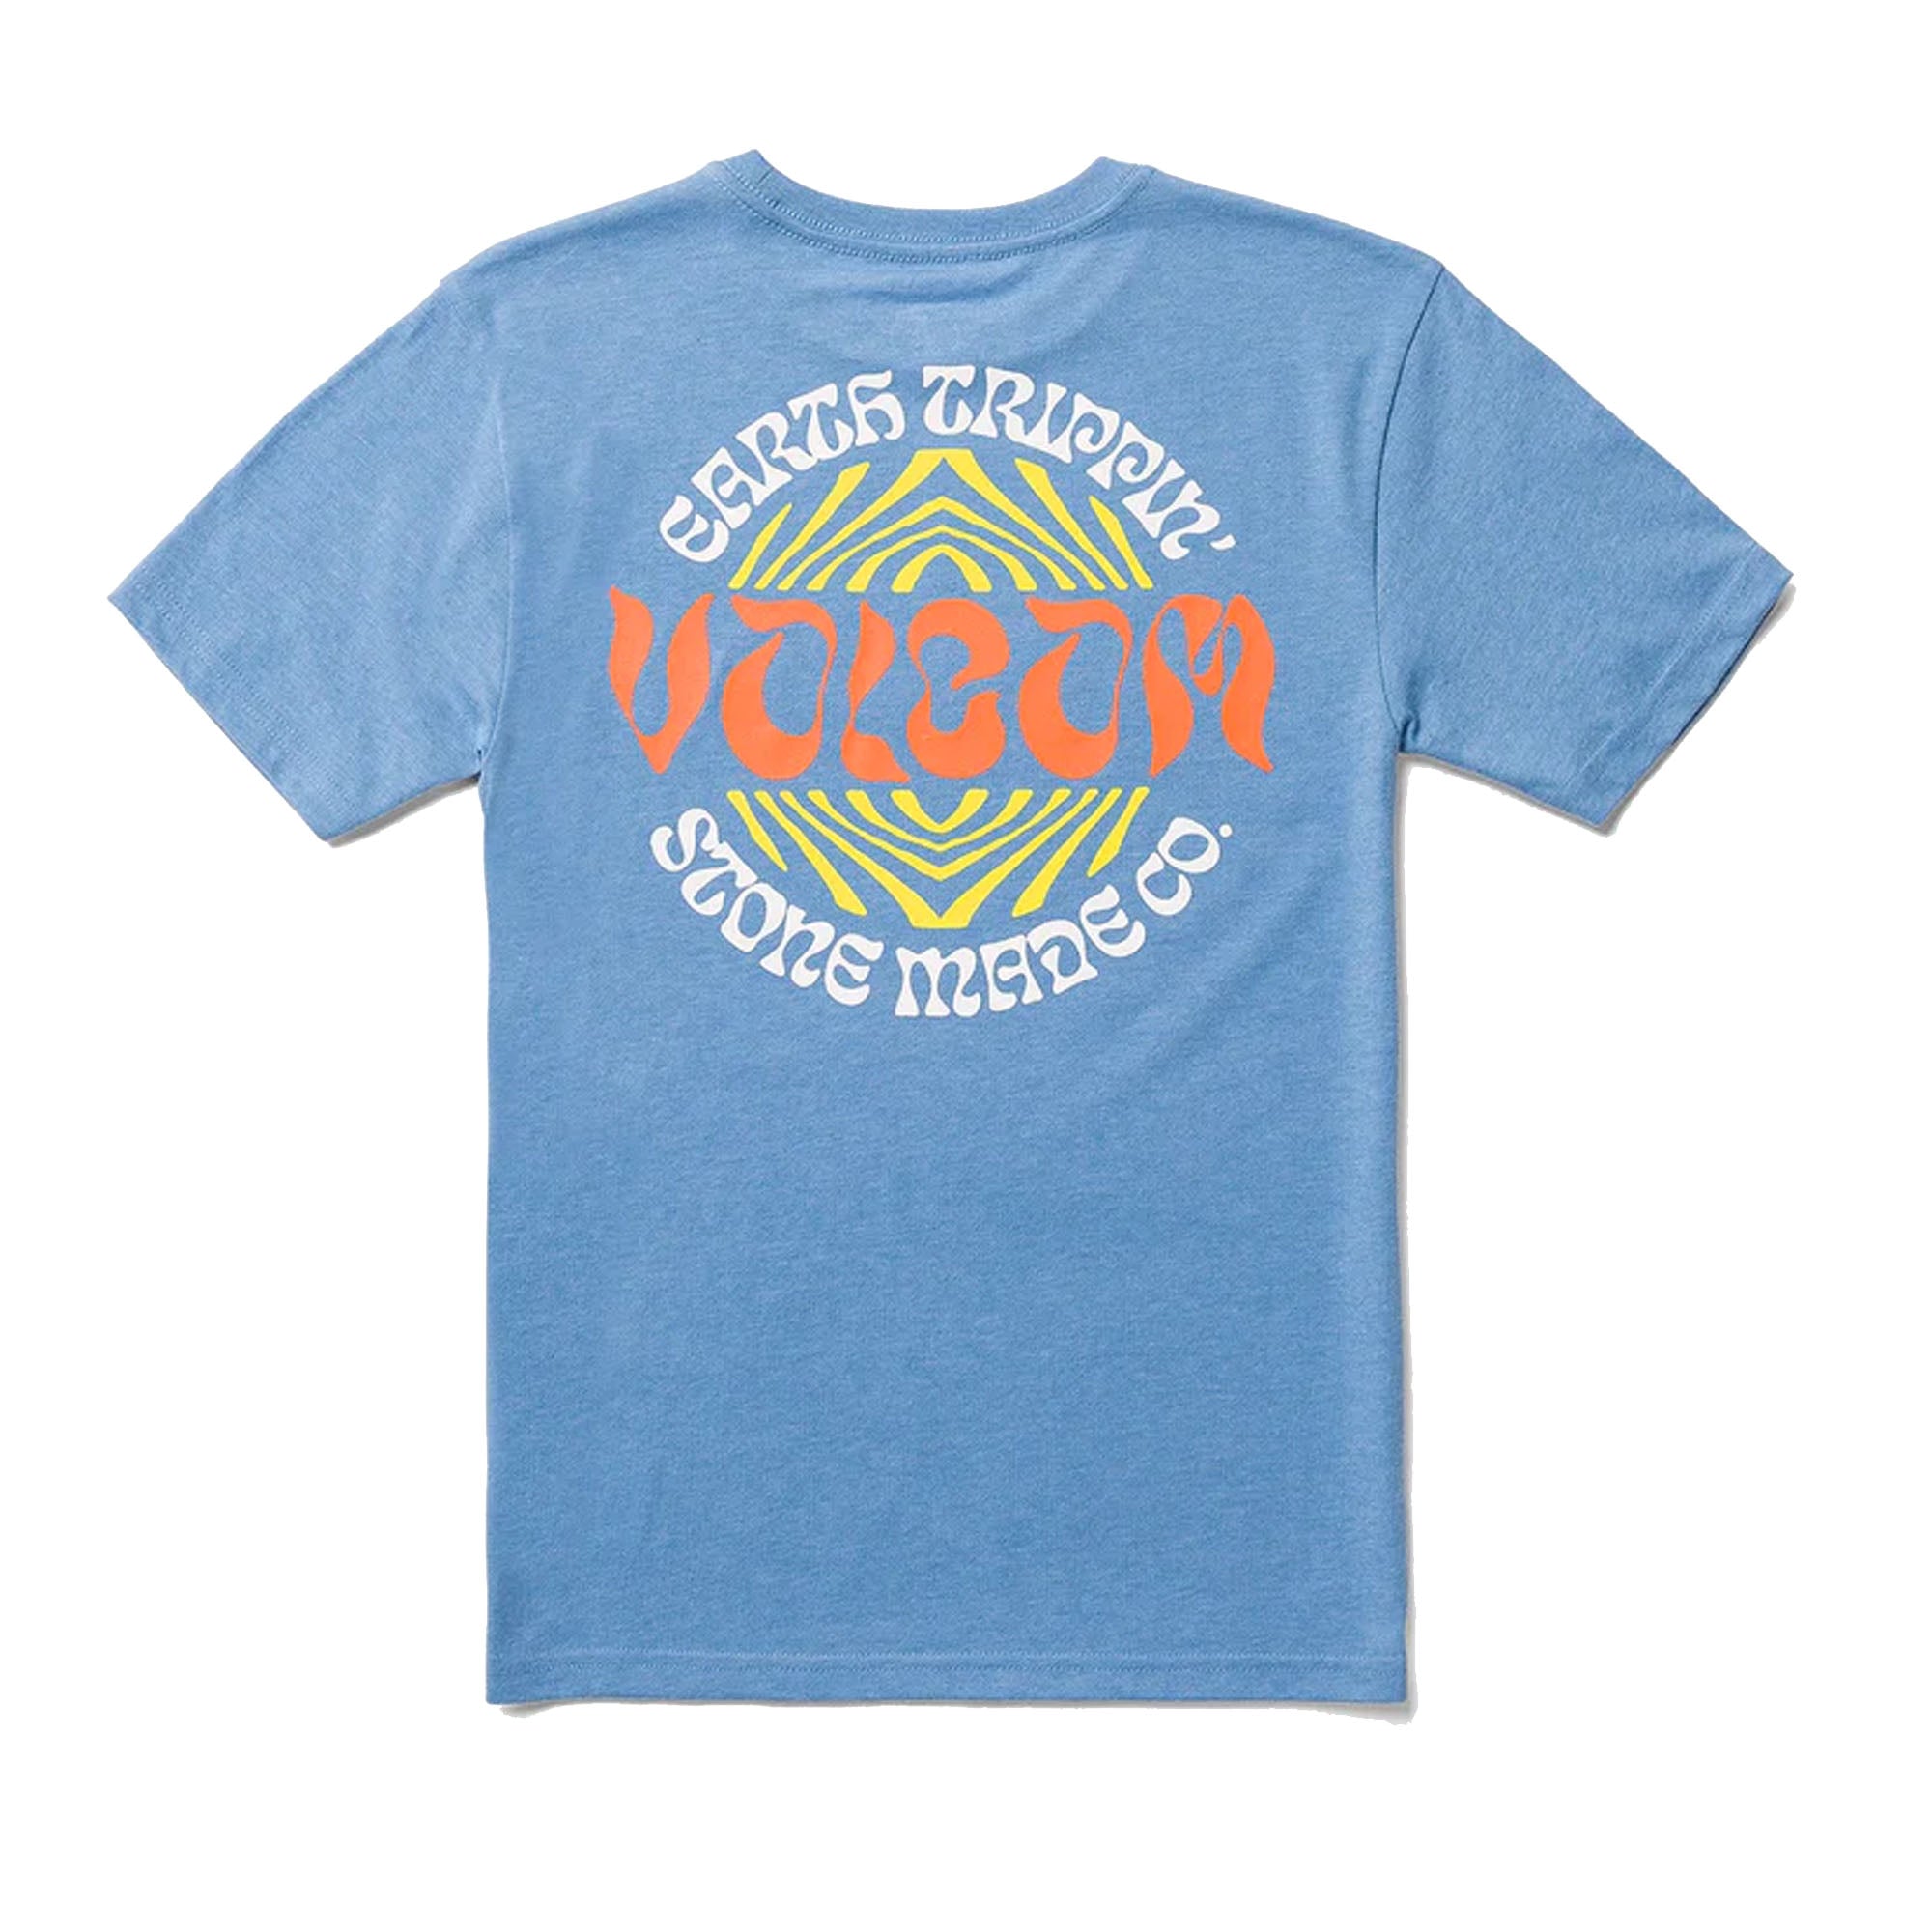 Volcom Stoneature Youth Boy's S/S T-Shirt